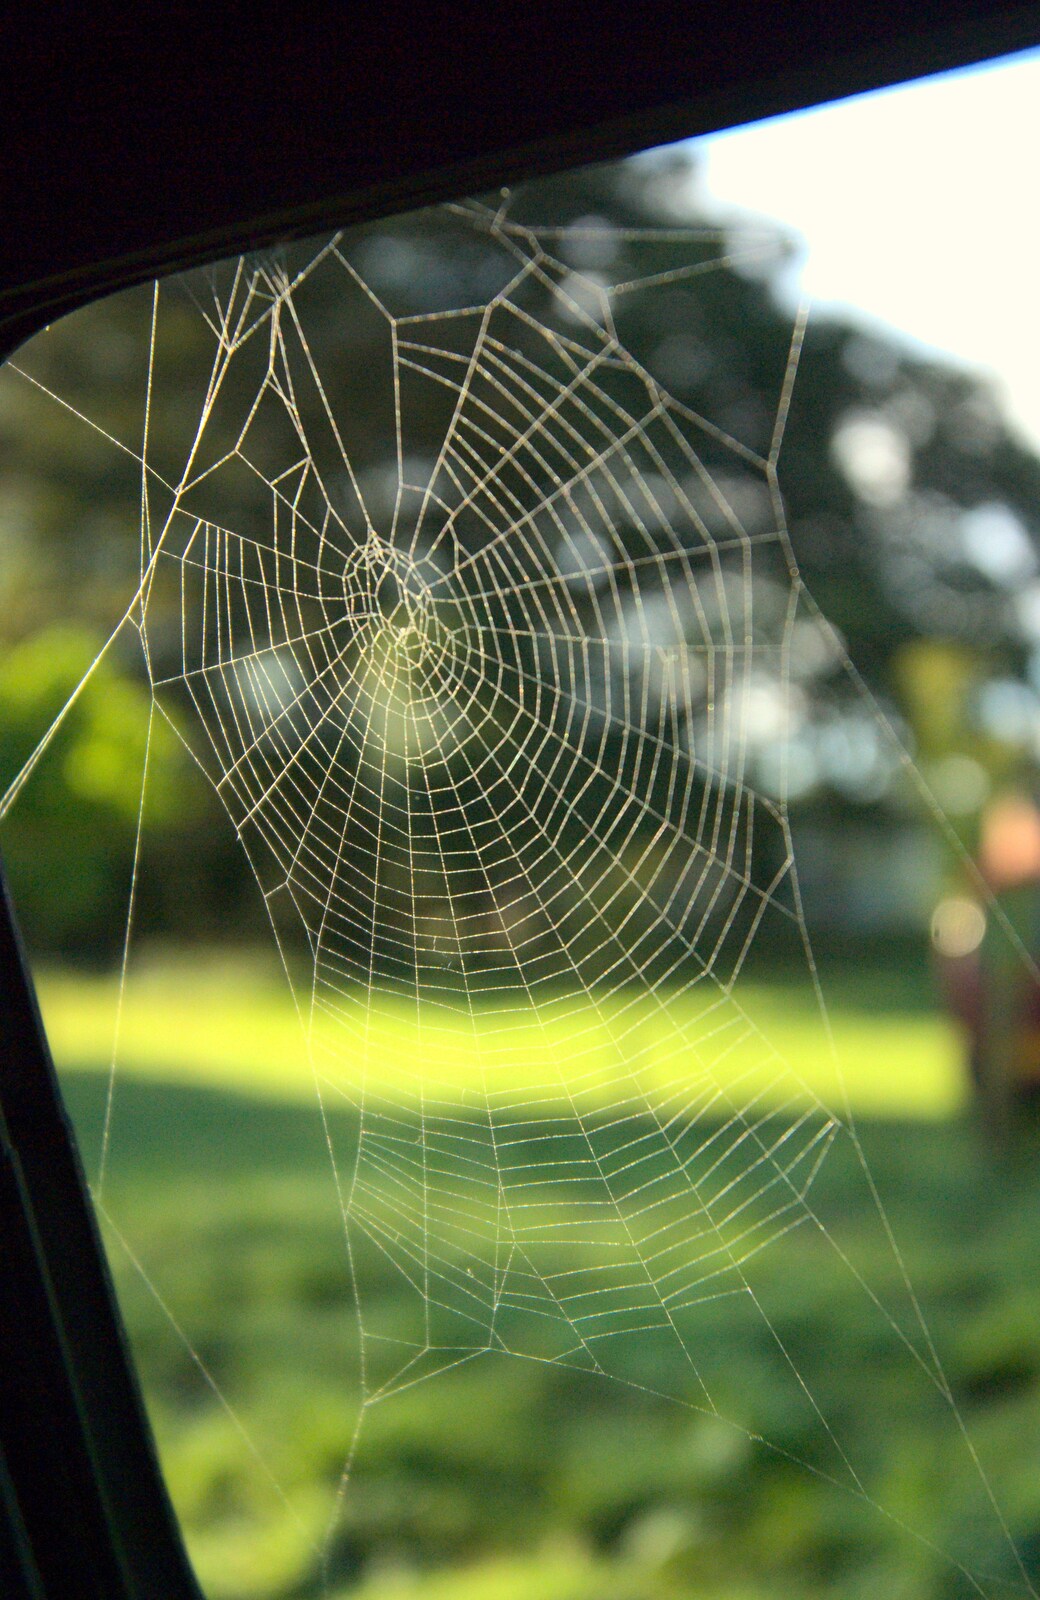 There's a cool spider web on the van window from The 1940s Steam Train Weekend, Holt, Norfolk - 18th September 2011